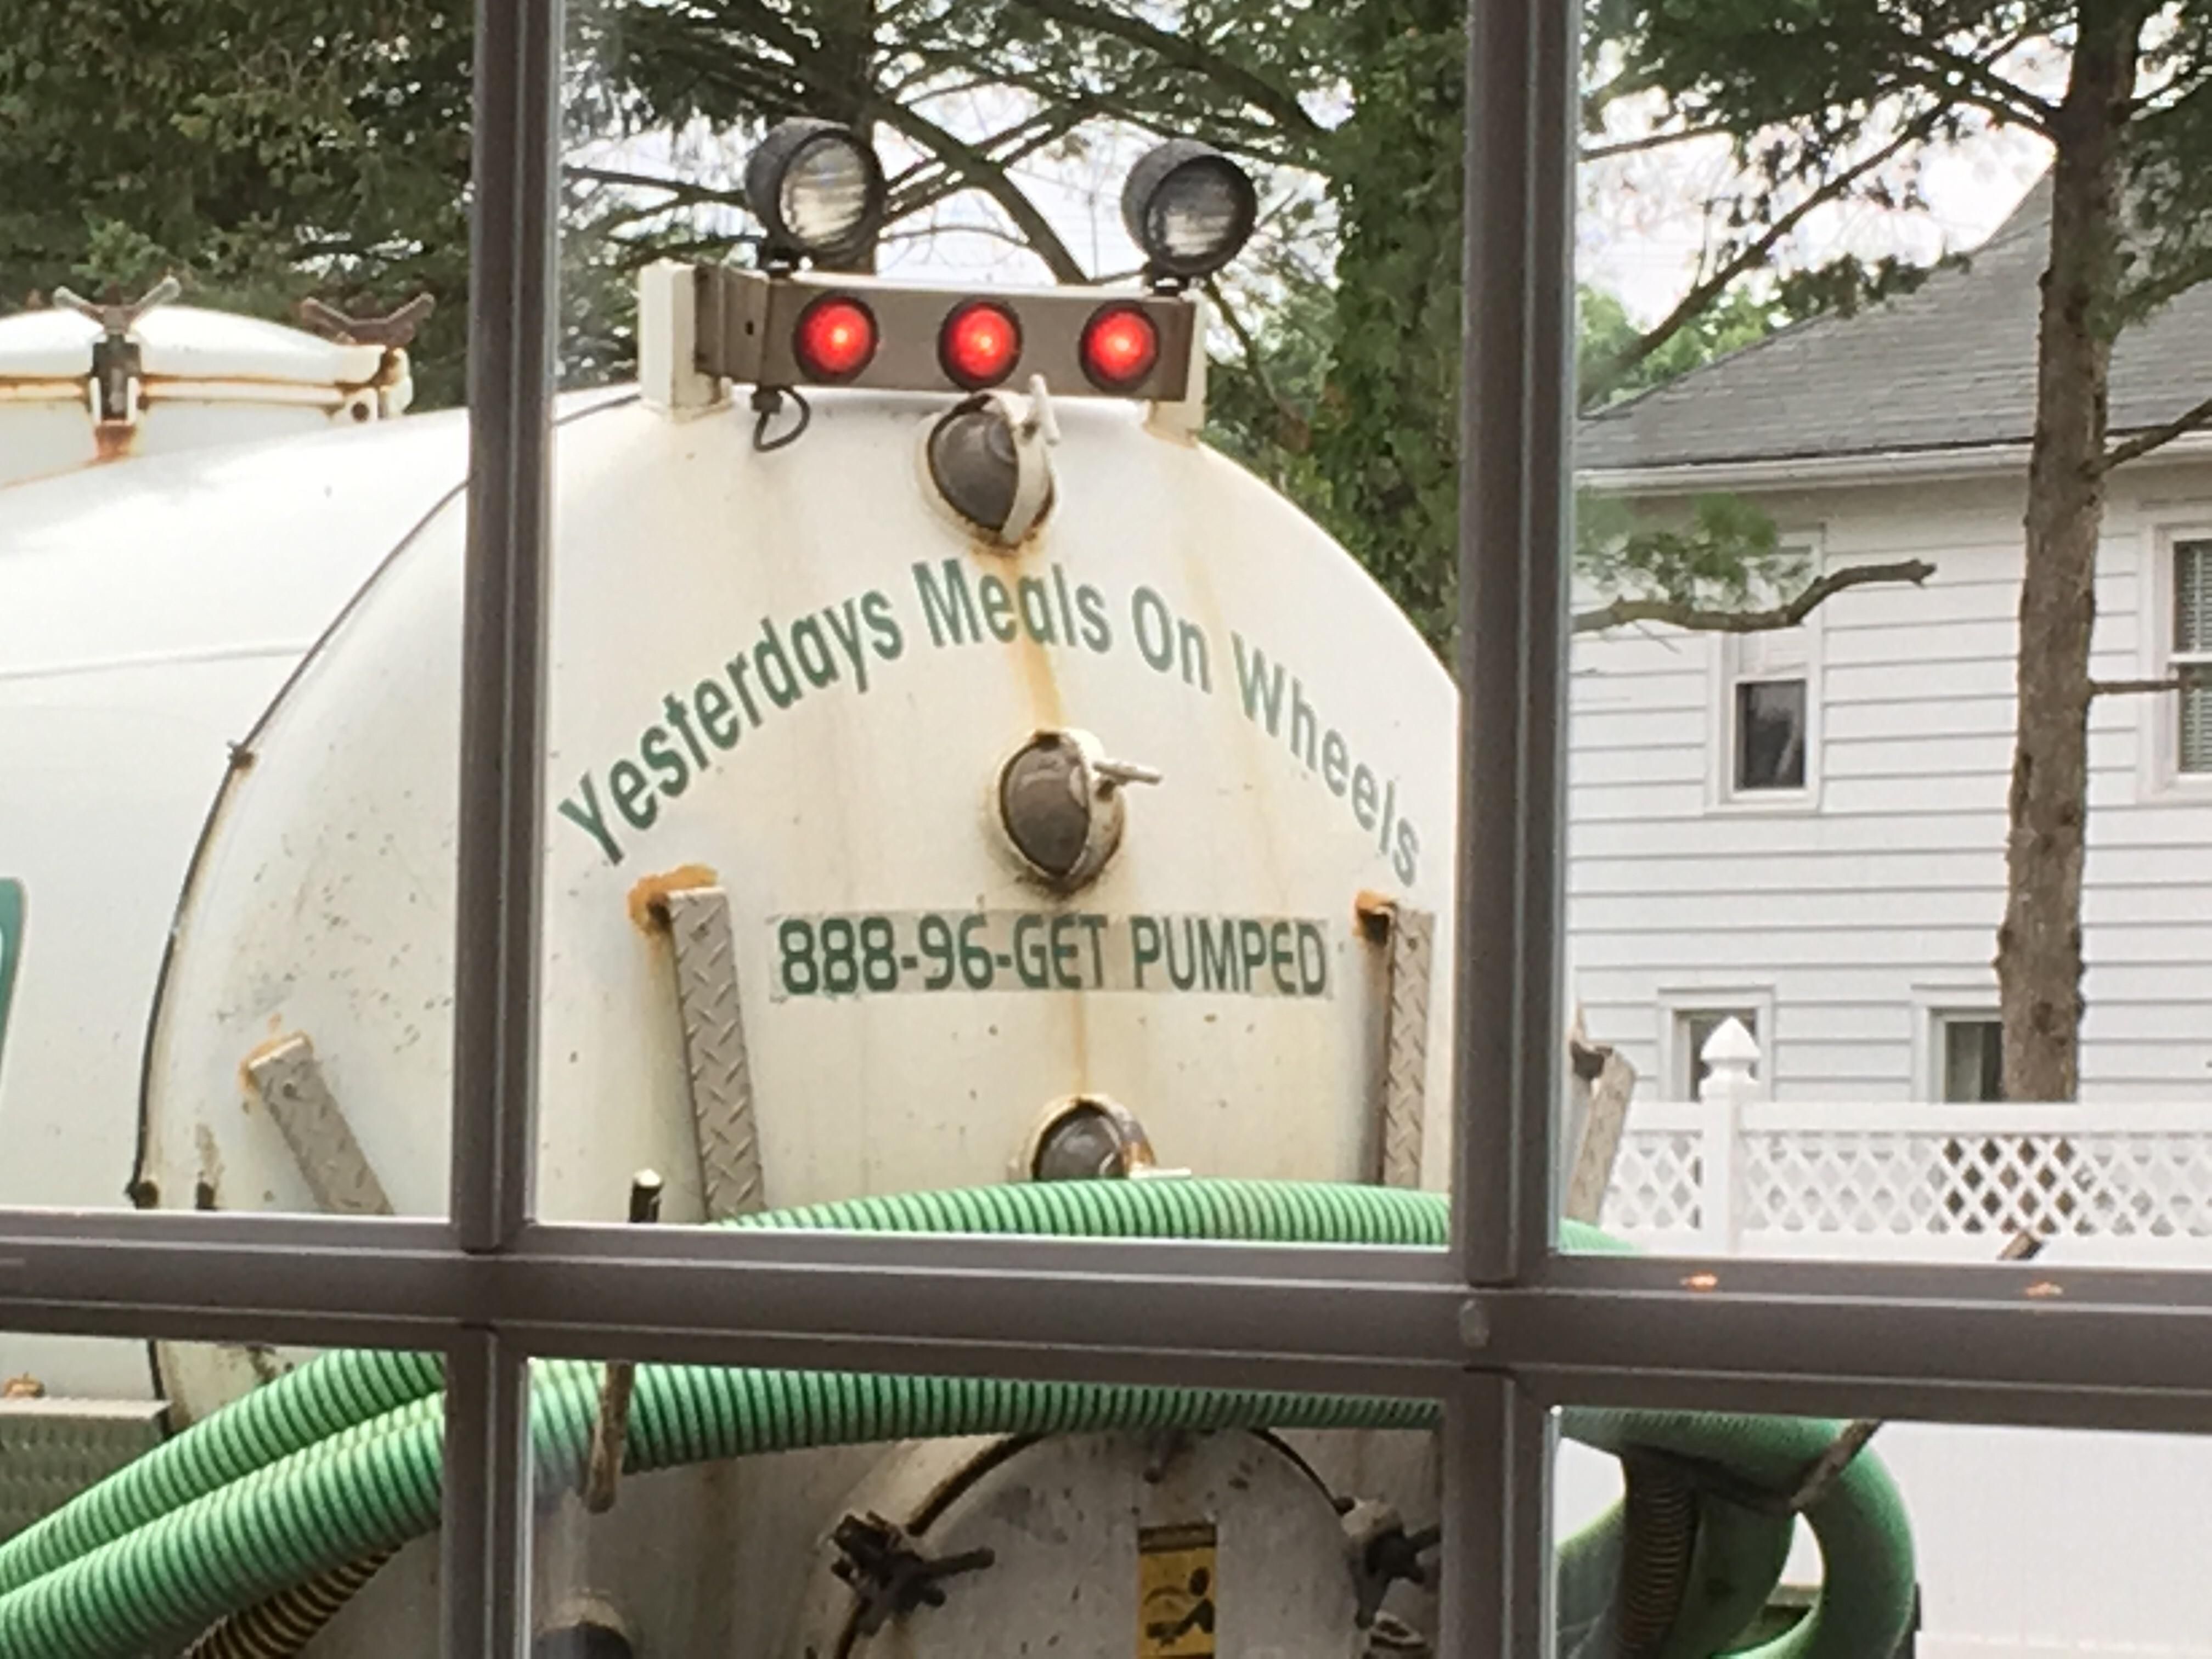 My local septic service has a sense of humor...